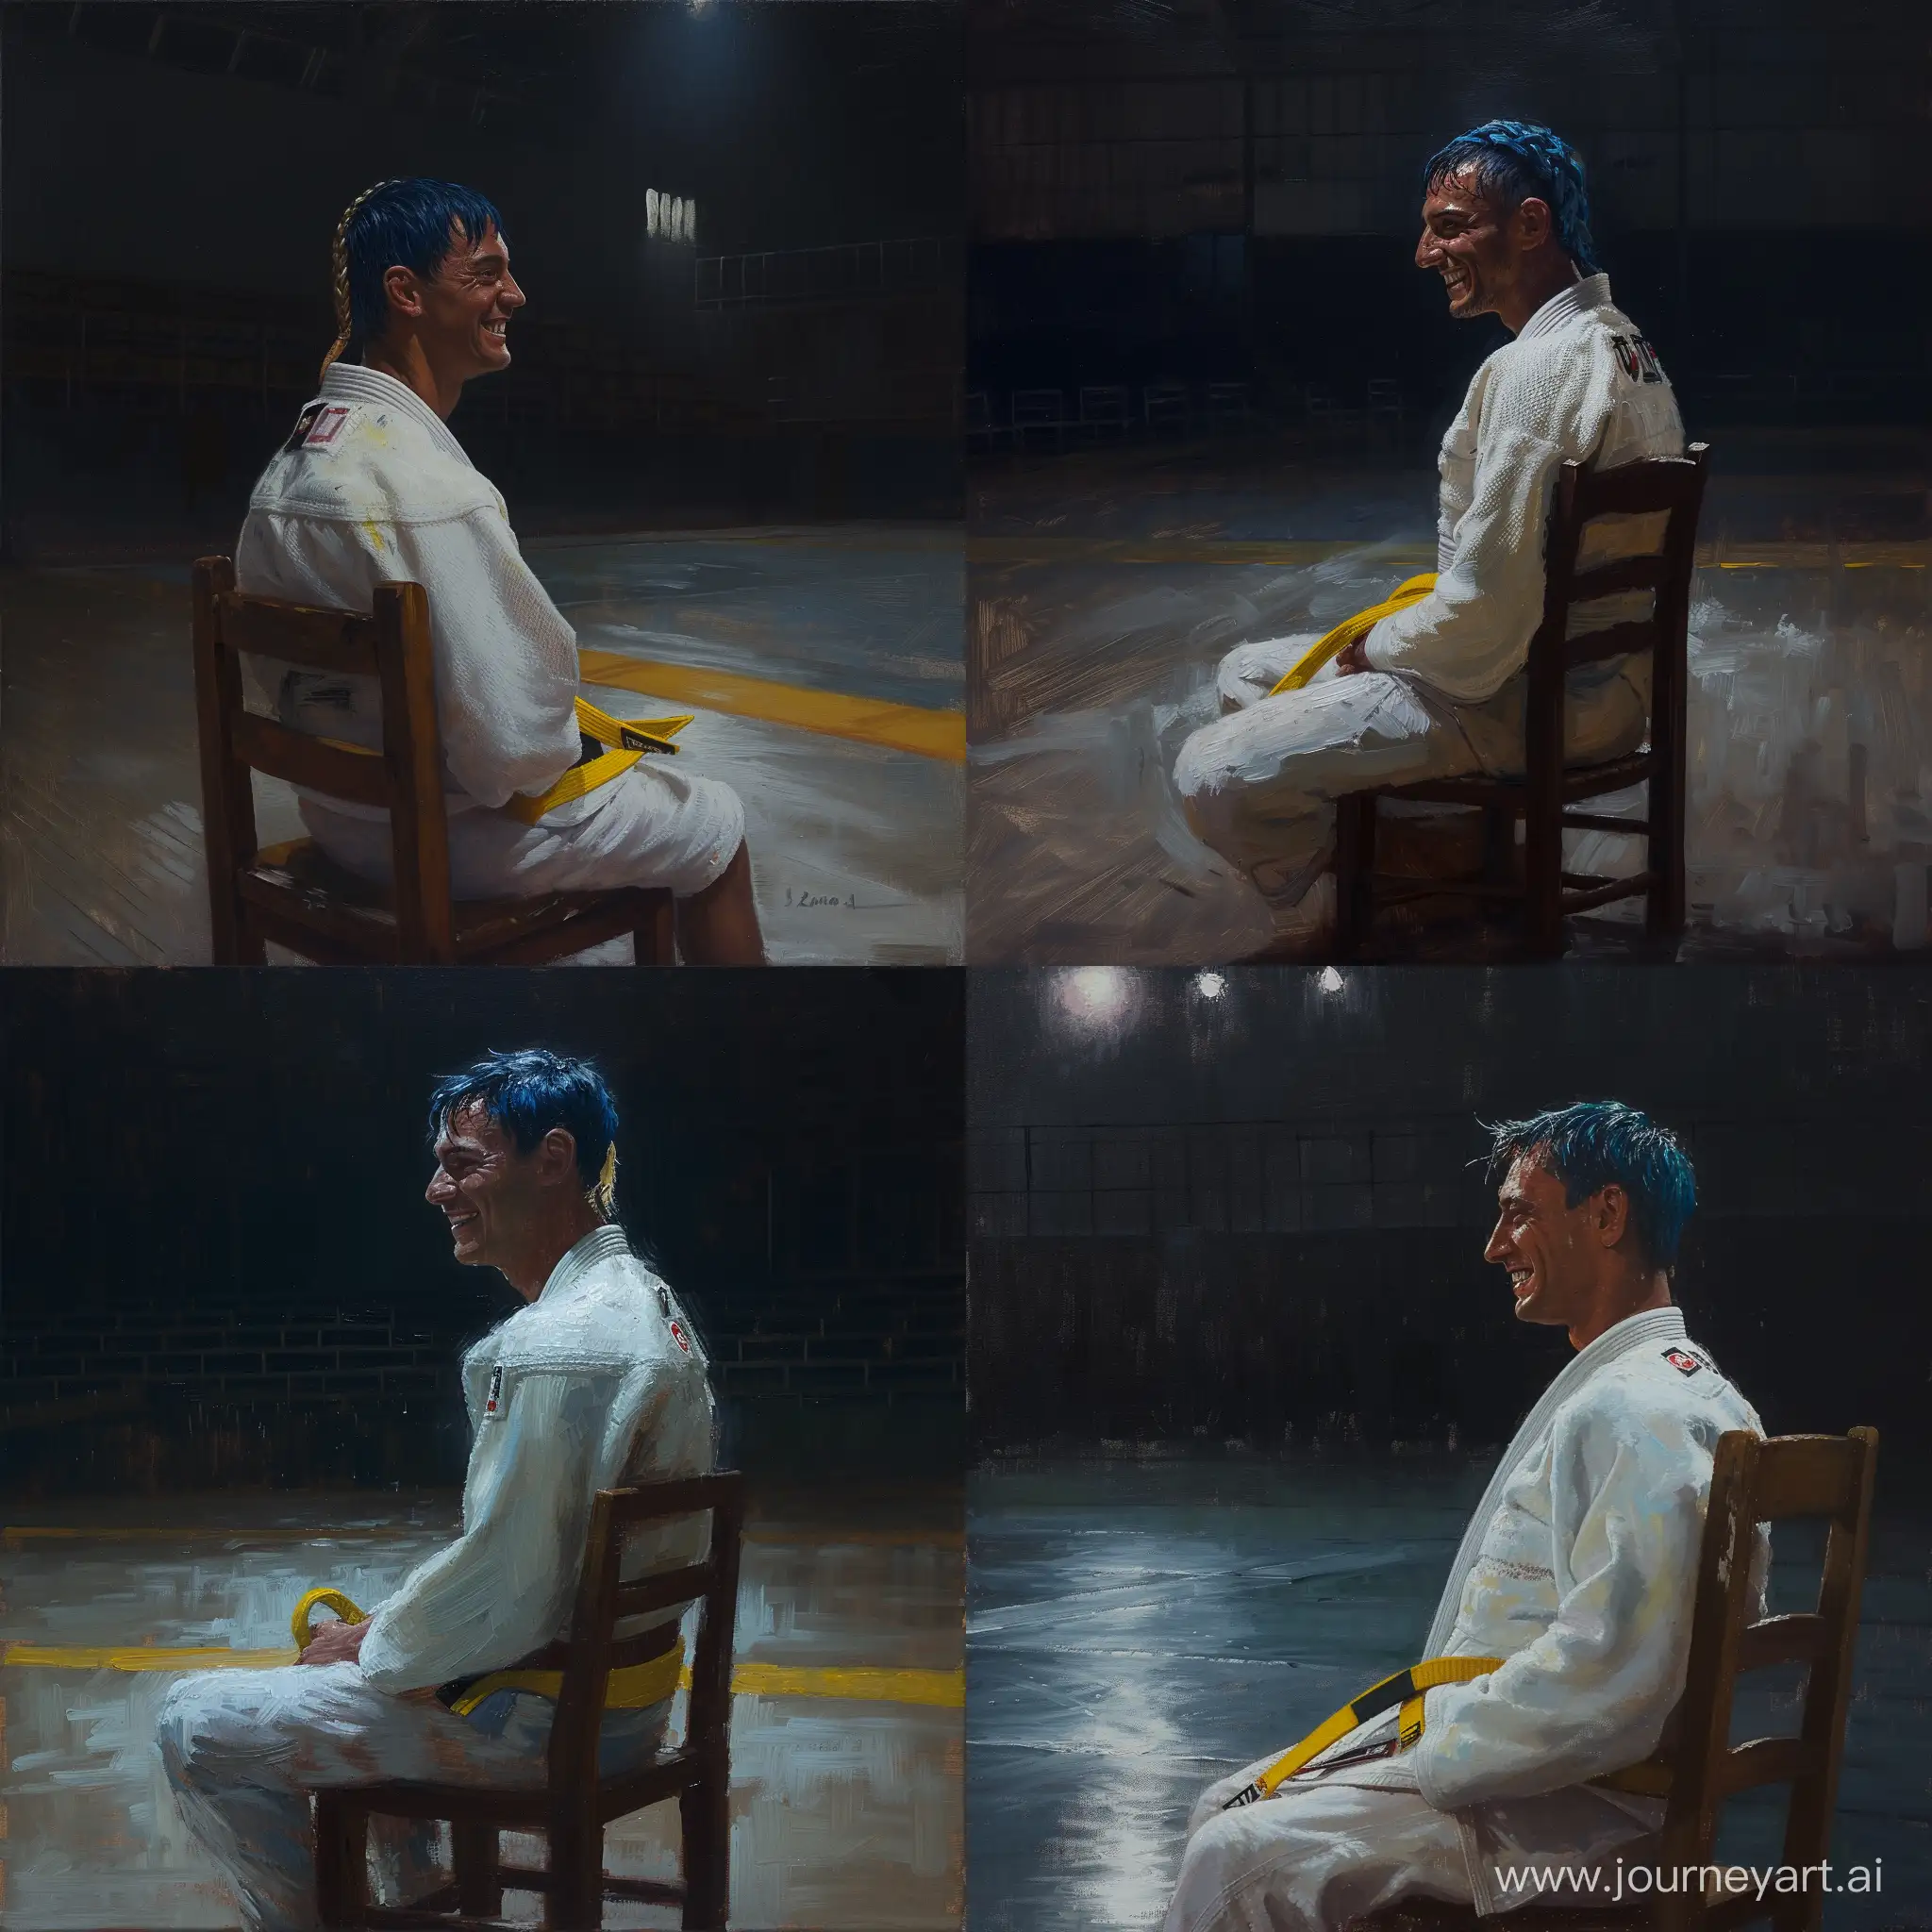 Oil paint. Full side shot of Moreno Renzi sitting alone on a wooden chair in a dark, empty sports hall. An exhausted smile. Very tanned skin. Very sweaty, dark blue hair, parted on the side with a small blonde French braid. Dimples. High quality wide white judo top. Long white judo. Yellow judo belt. Dimly lit on one side. Very dark background. Backlight glow. sincere. Facing to one side